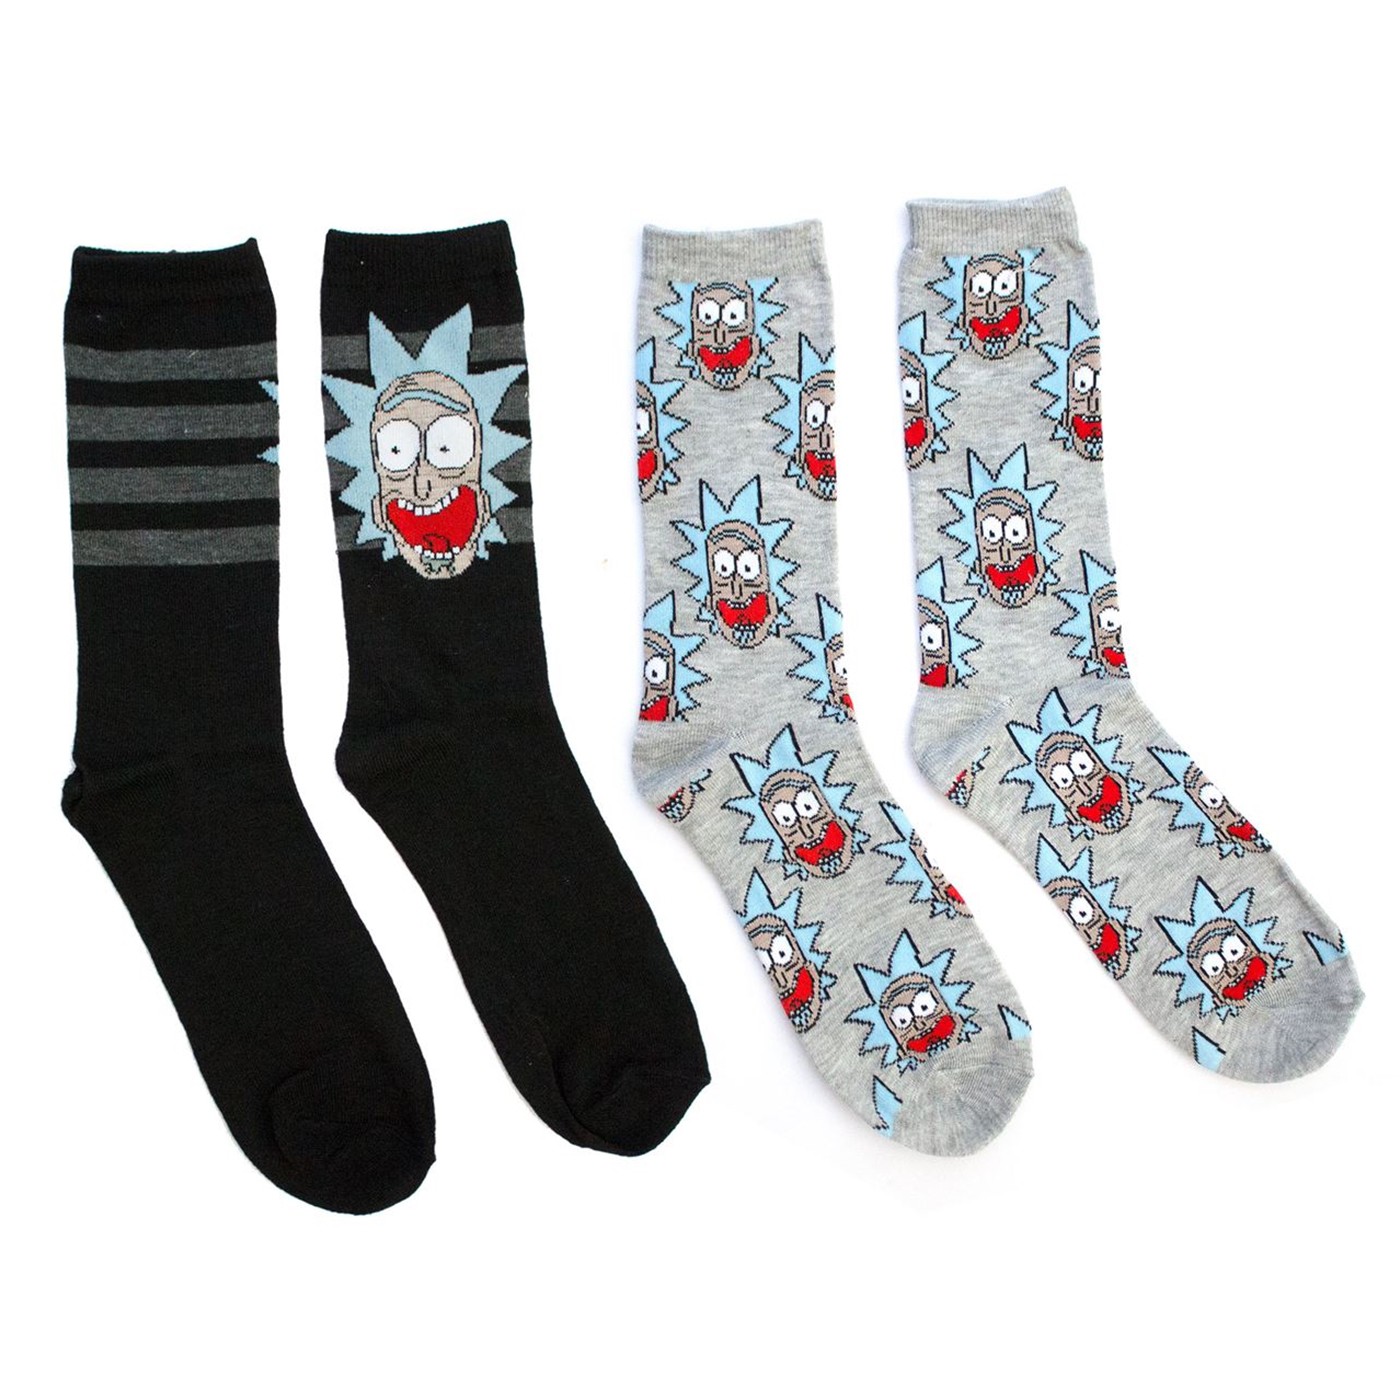 Rick And Morty 2 Pack Let's get Schwifty Black Crew Socks 2 Pack 